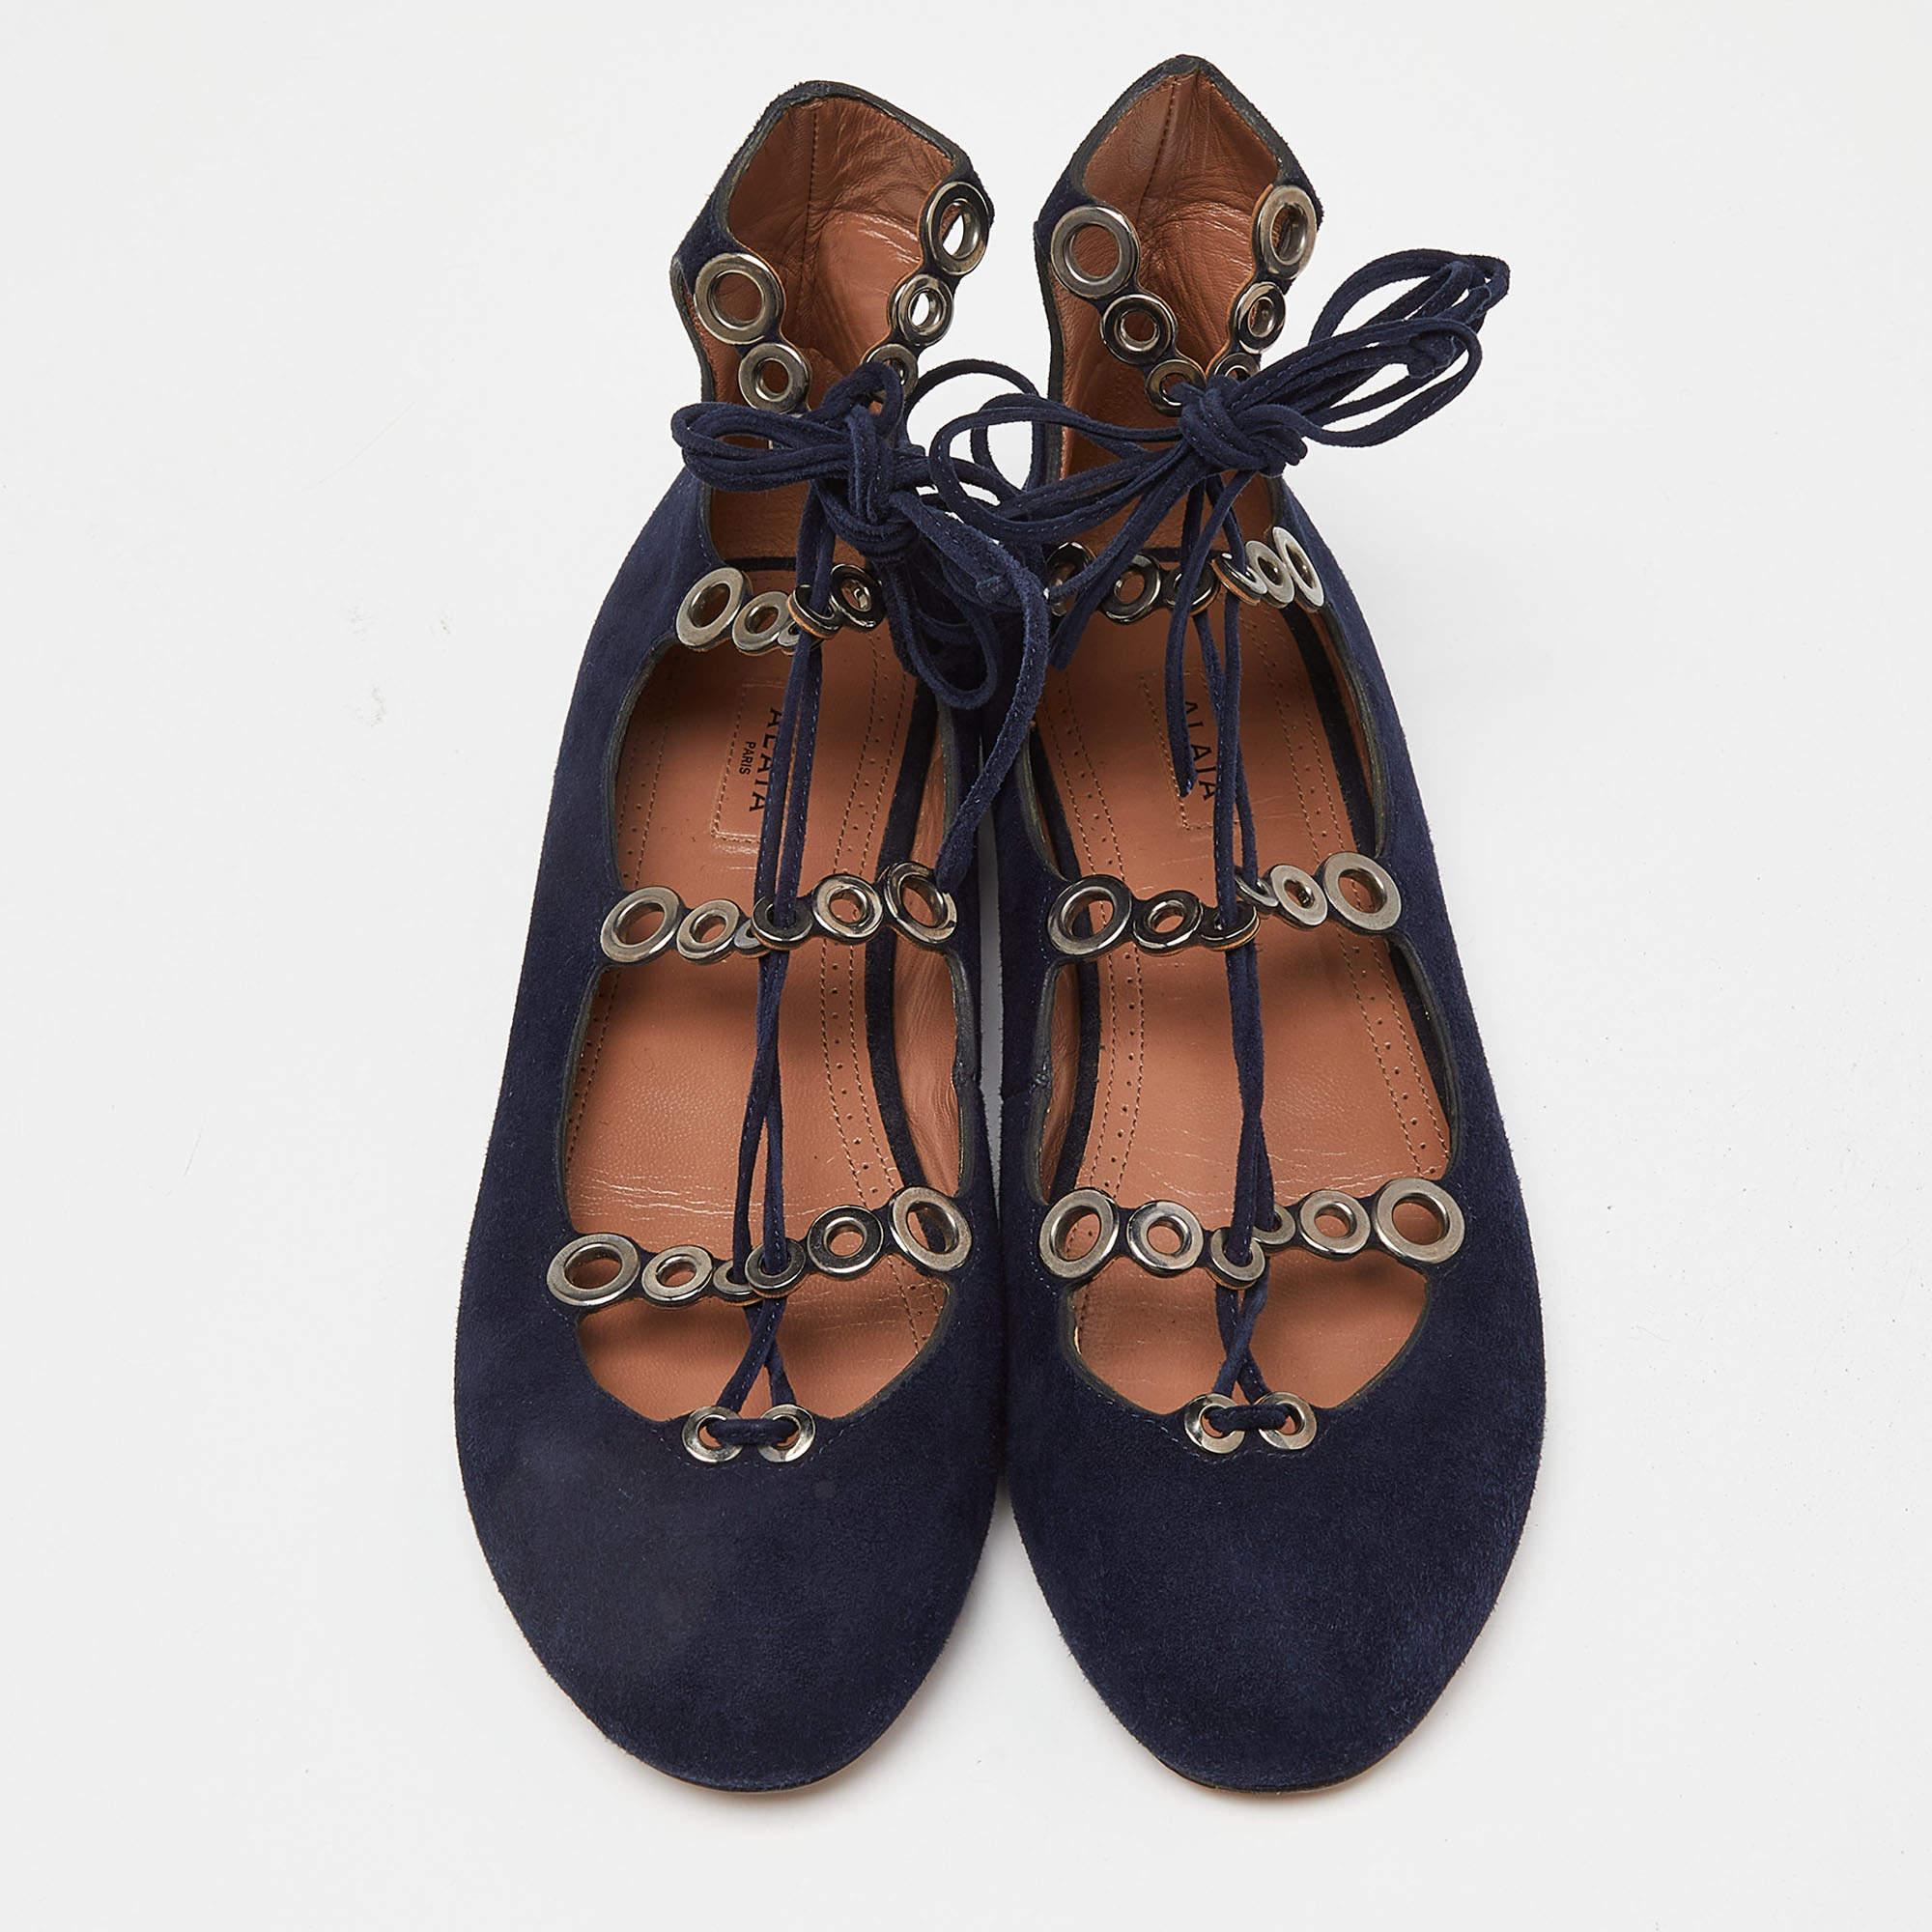 These designer ballet flats by Alaia will instantly make you feel in style. Classy in blue, this pair is crafted from suede. Lace-up details and little bows are added to complete the lovely design. Keep it light and casual with this cute pair.

